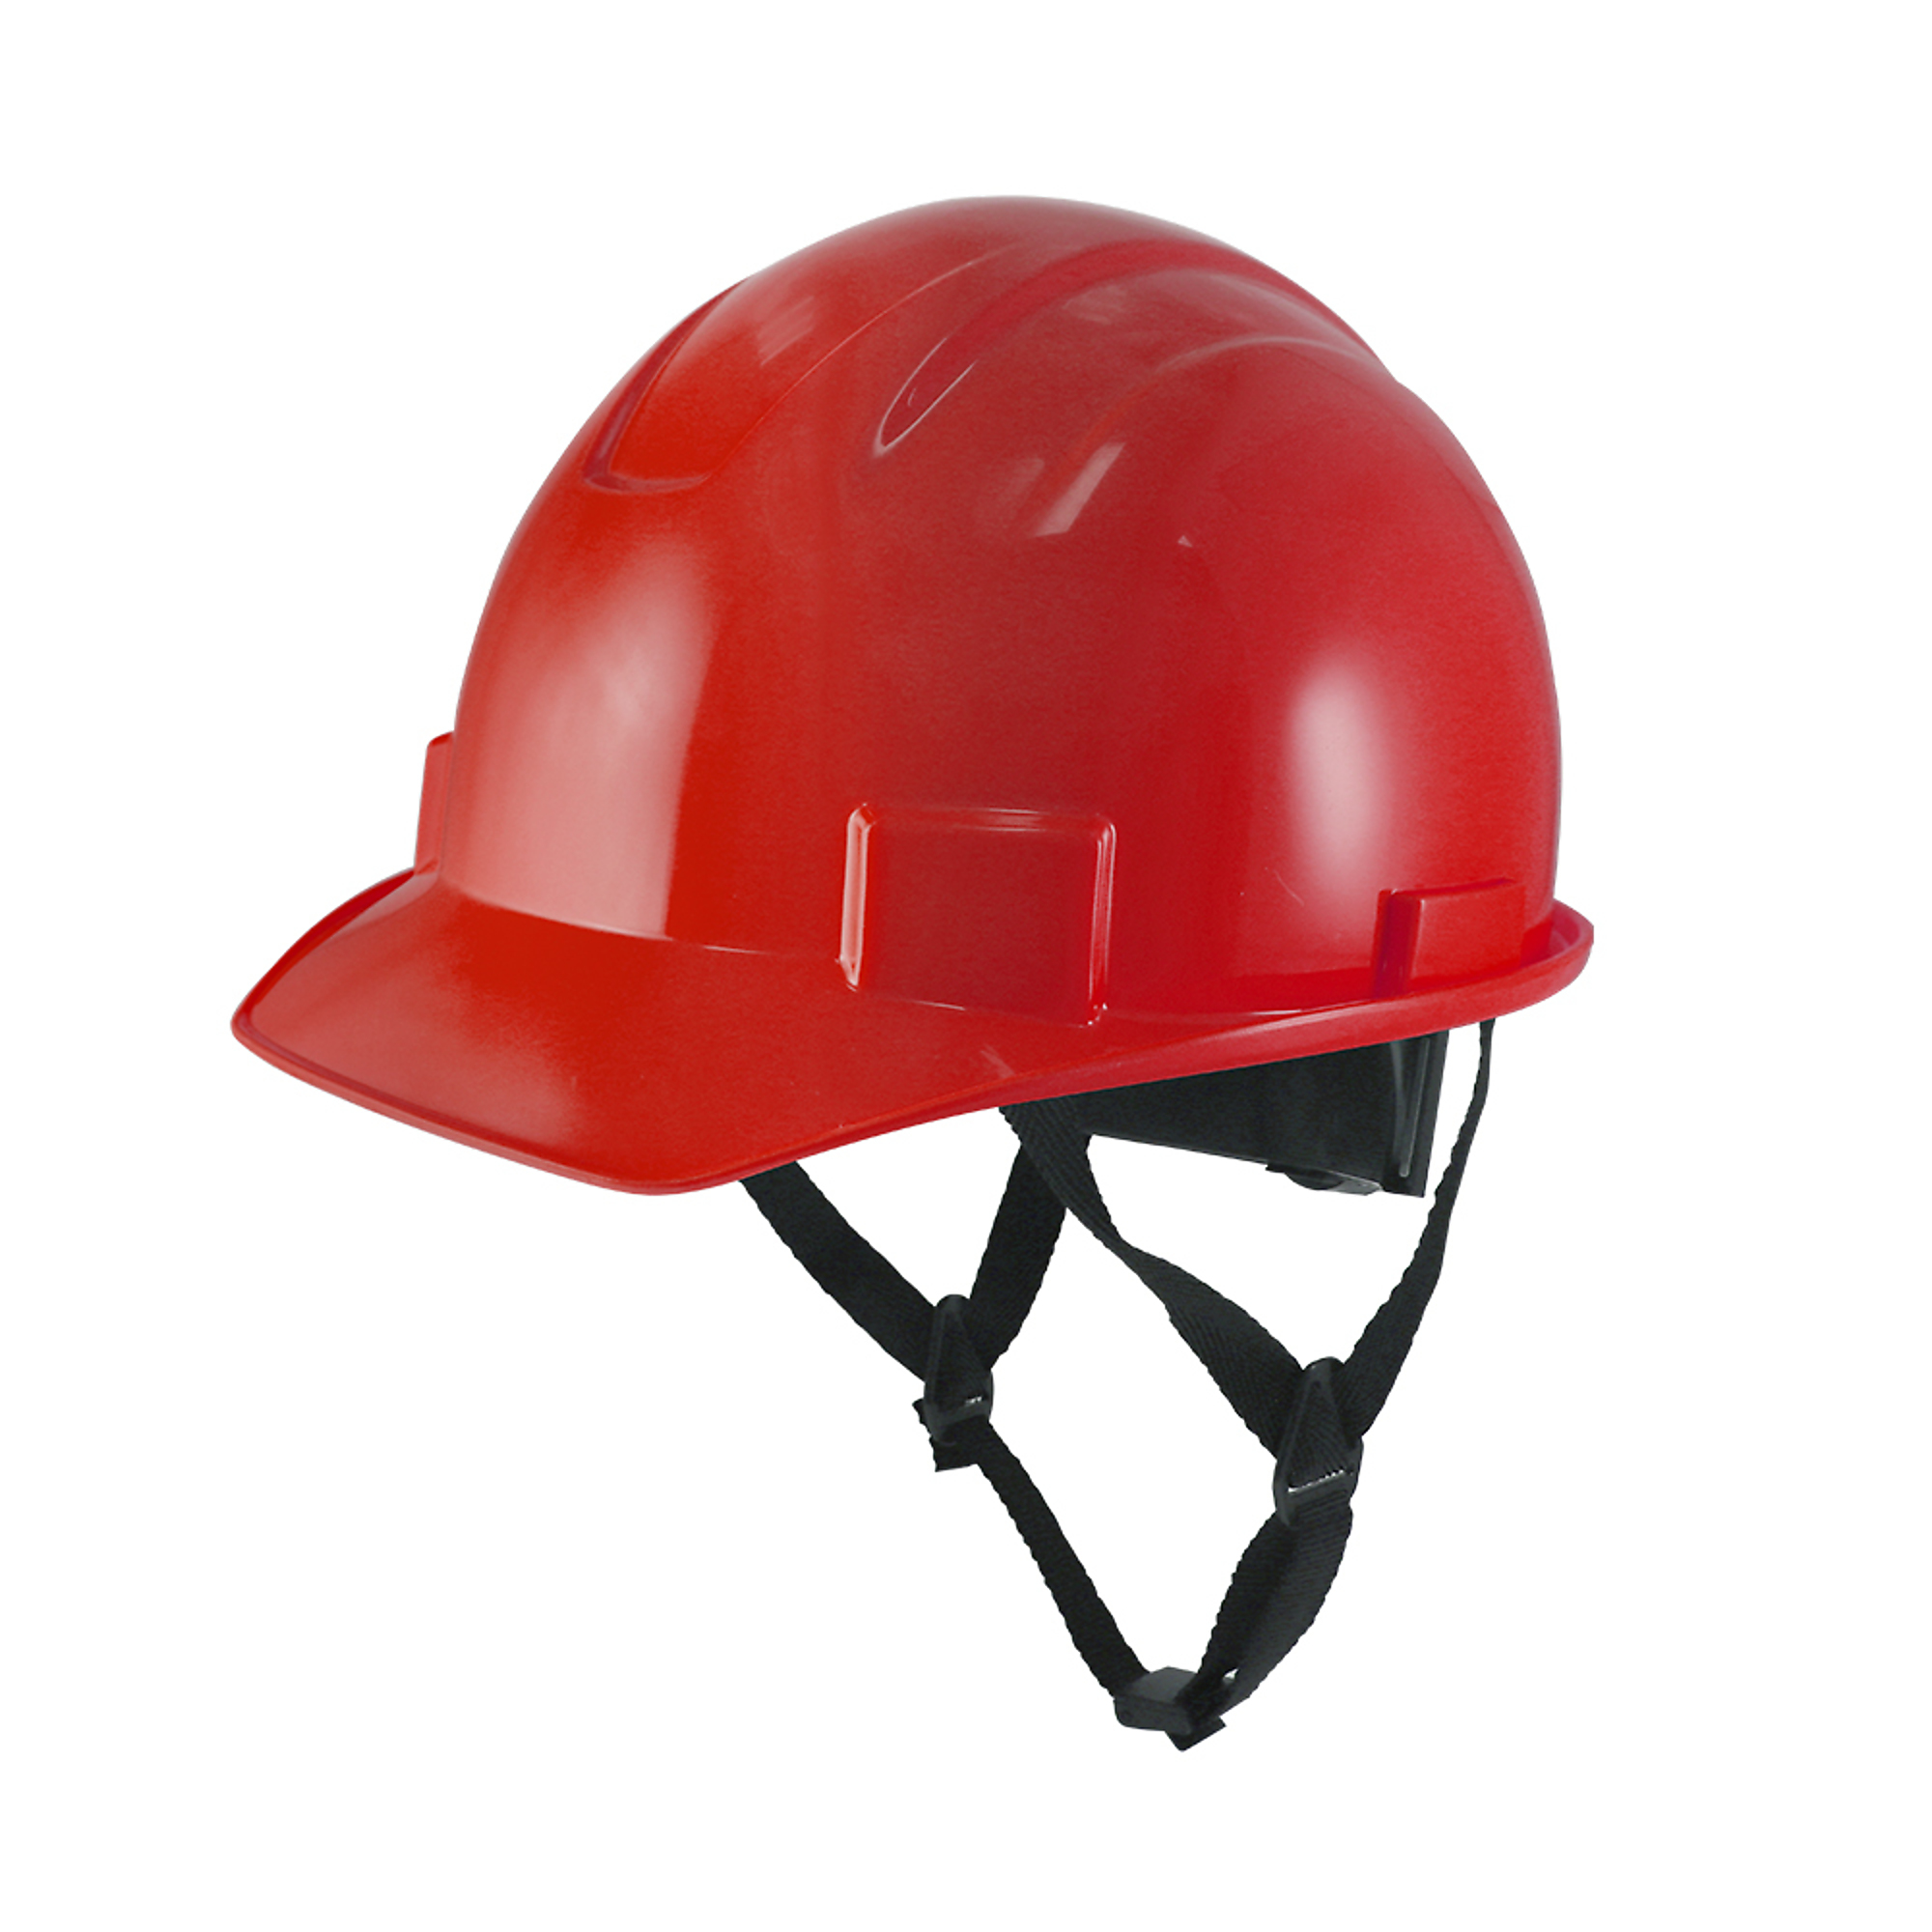 General Electric, Safety Helmet- Non-Vented- Red, Hard Hat Style Helmet, Hat Size One Size, Color Red, Model GH327R